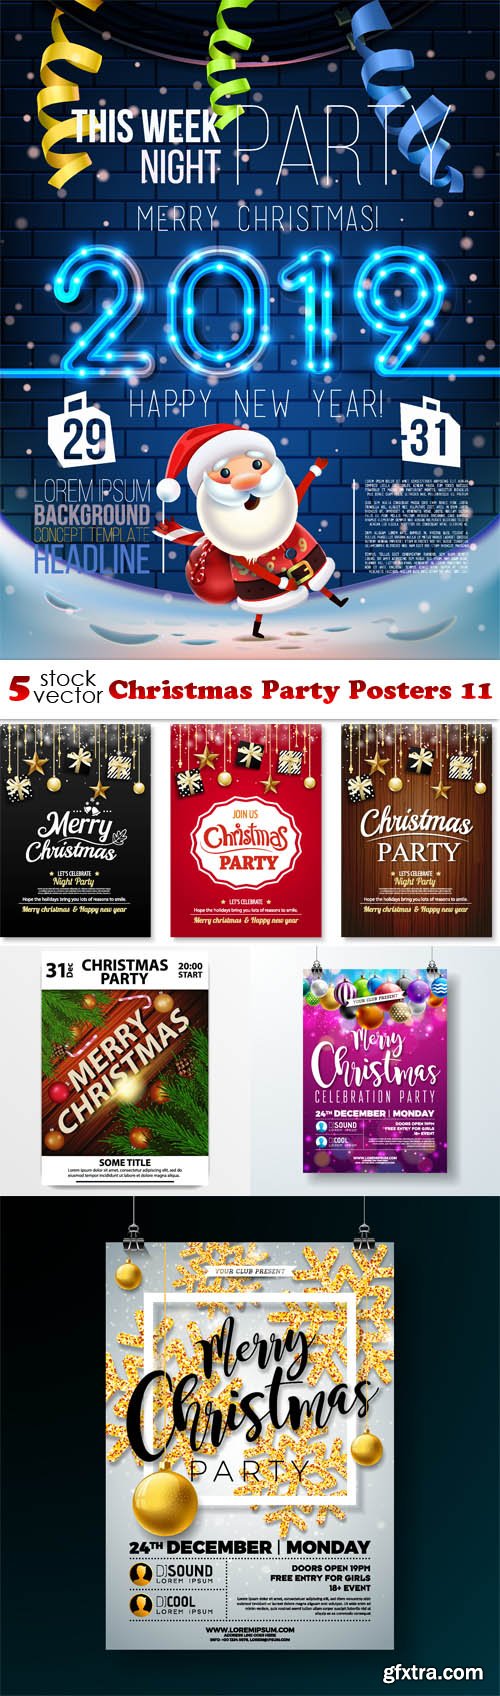 Vectors - Christmas Party Posters 11